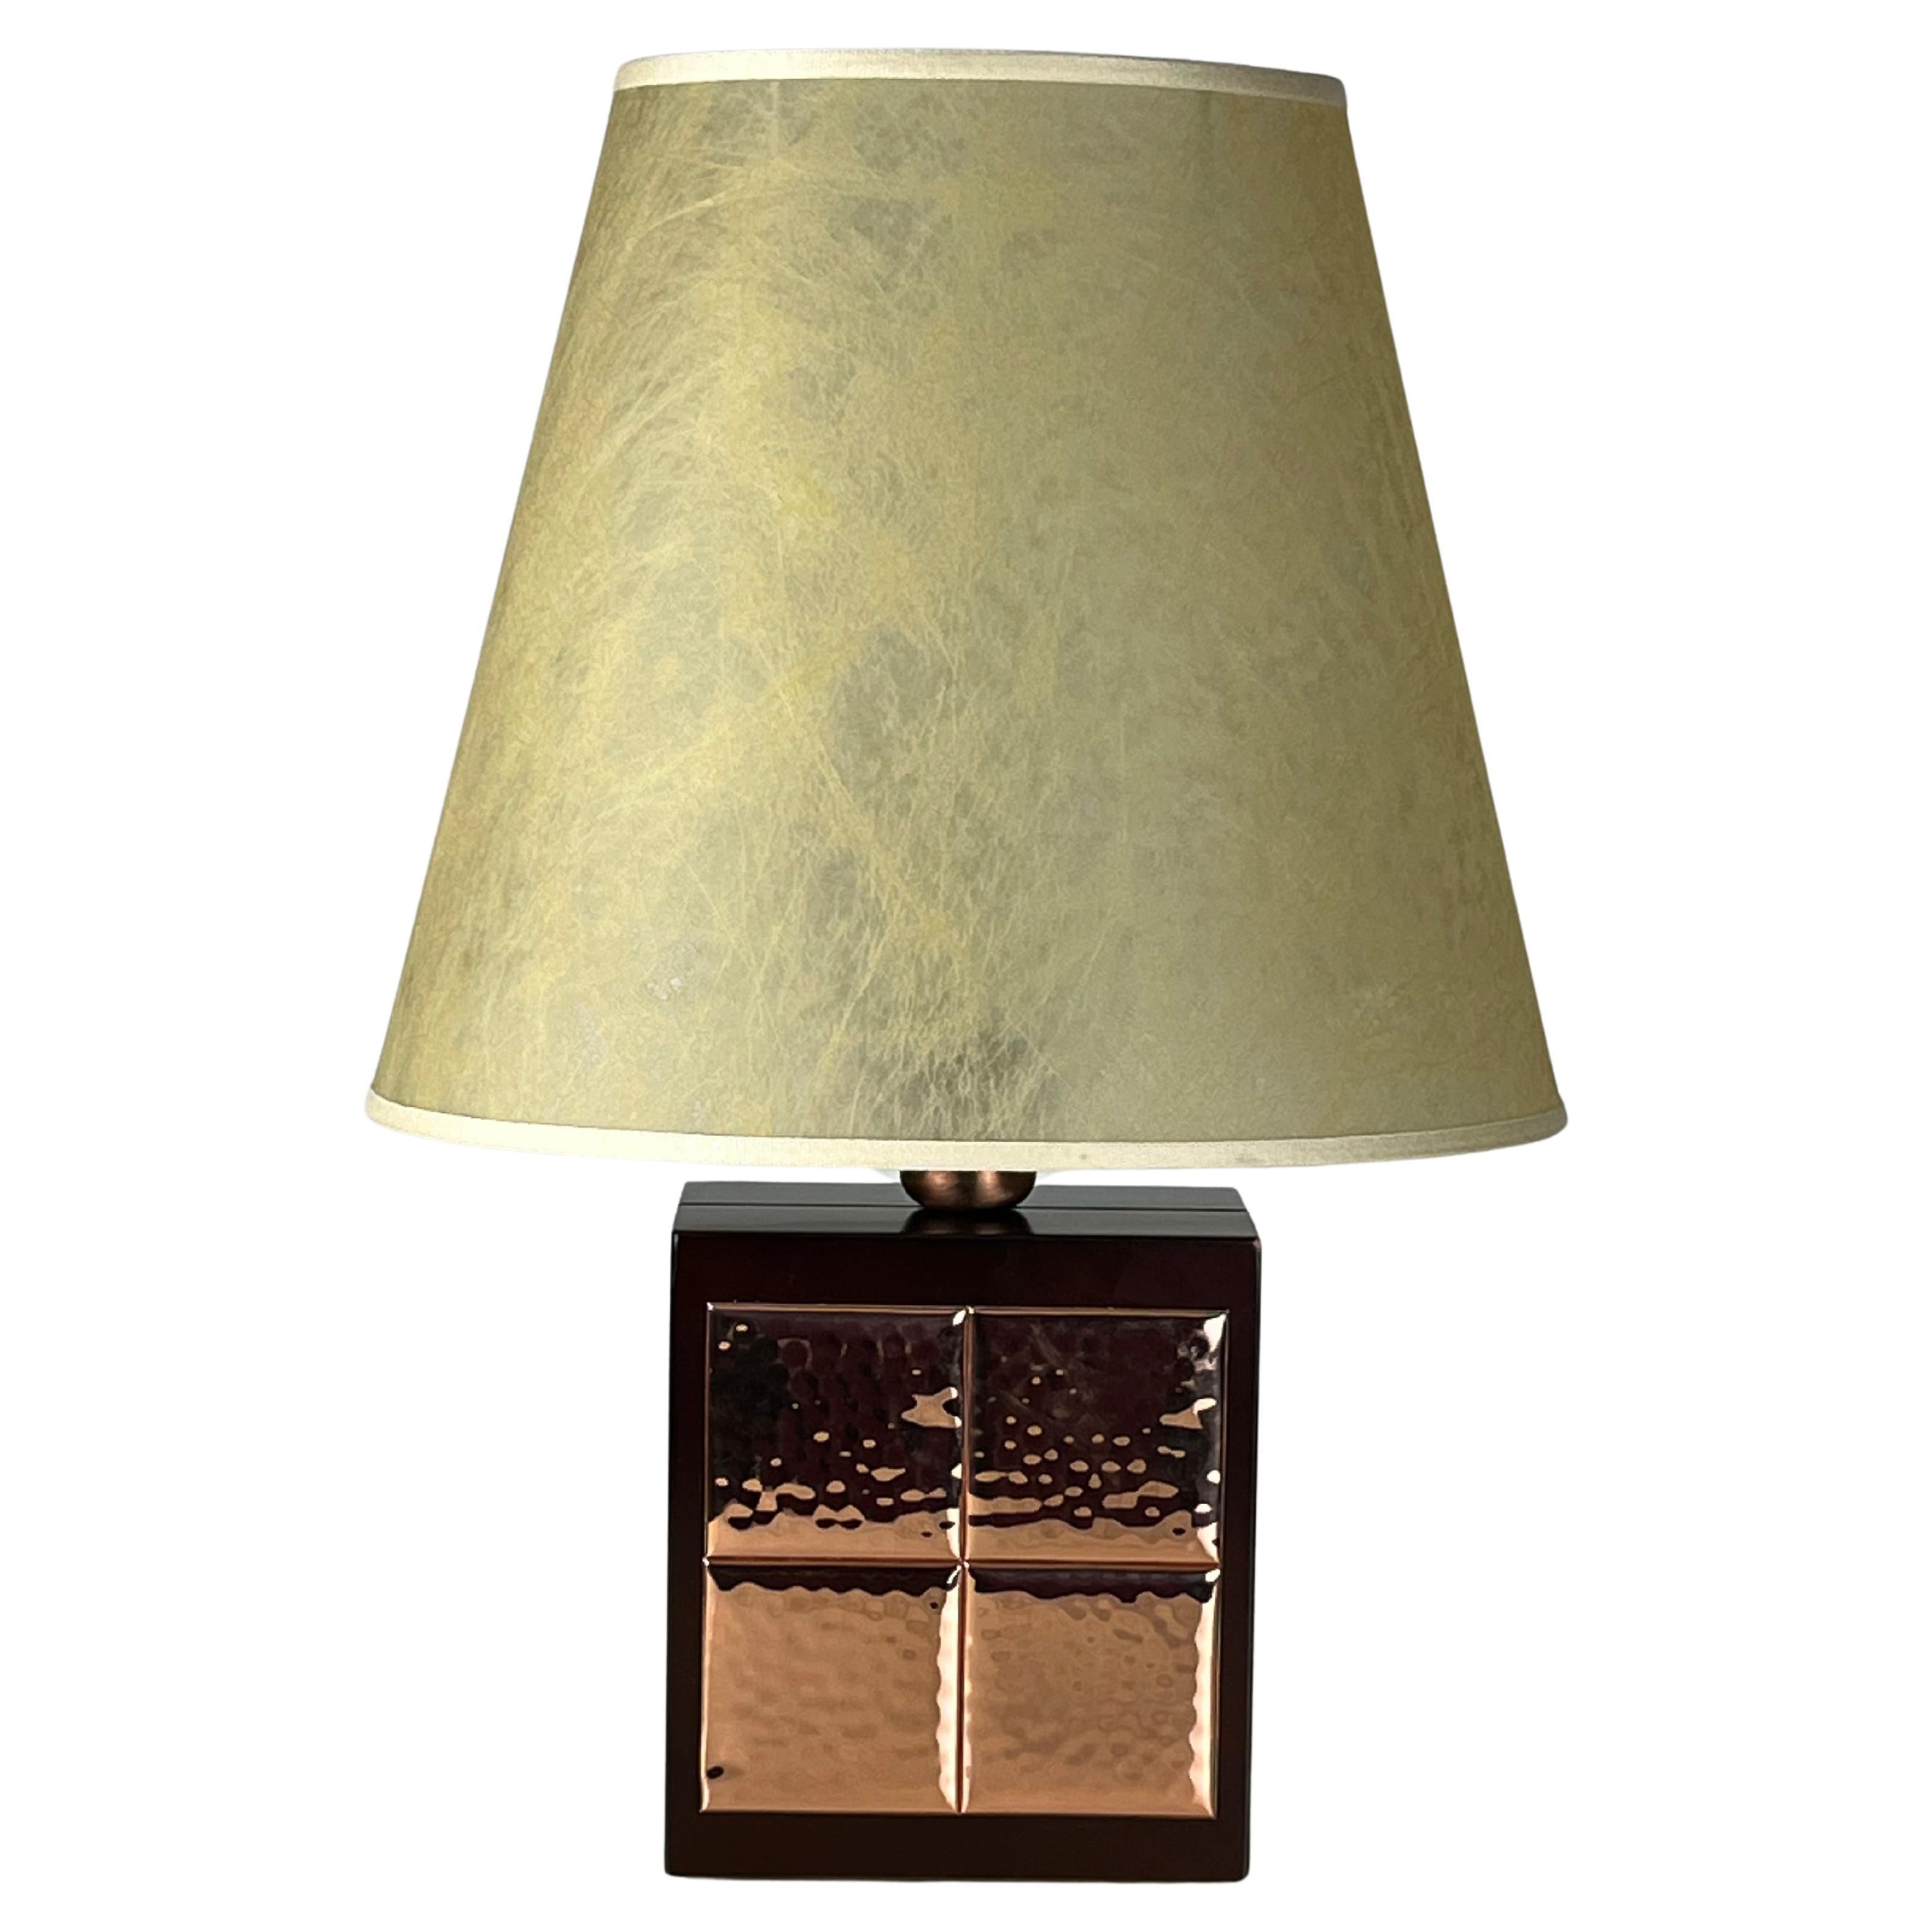 Italian Table Lamp in Walnut and Copper, 1990s For Sale